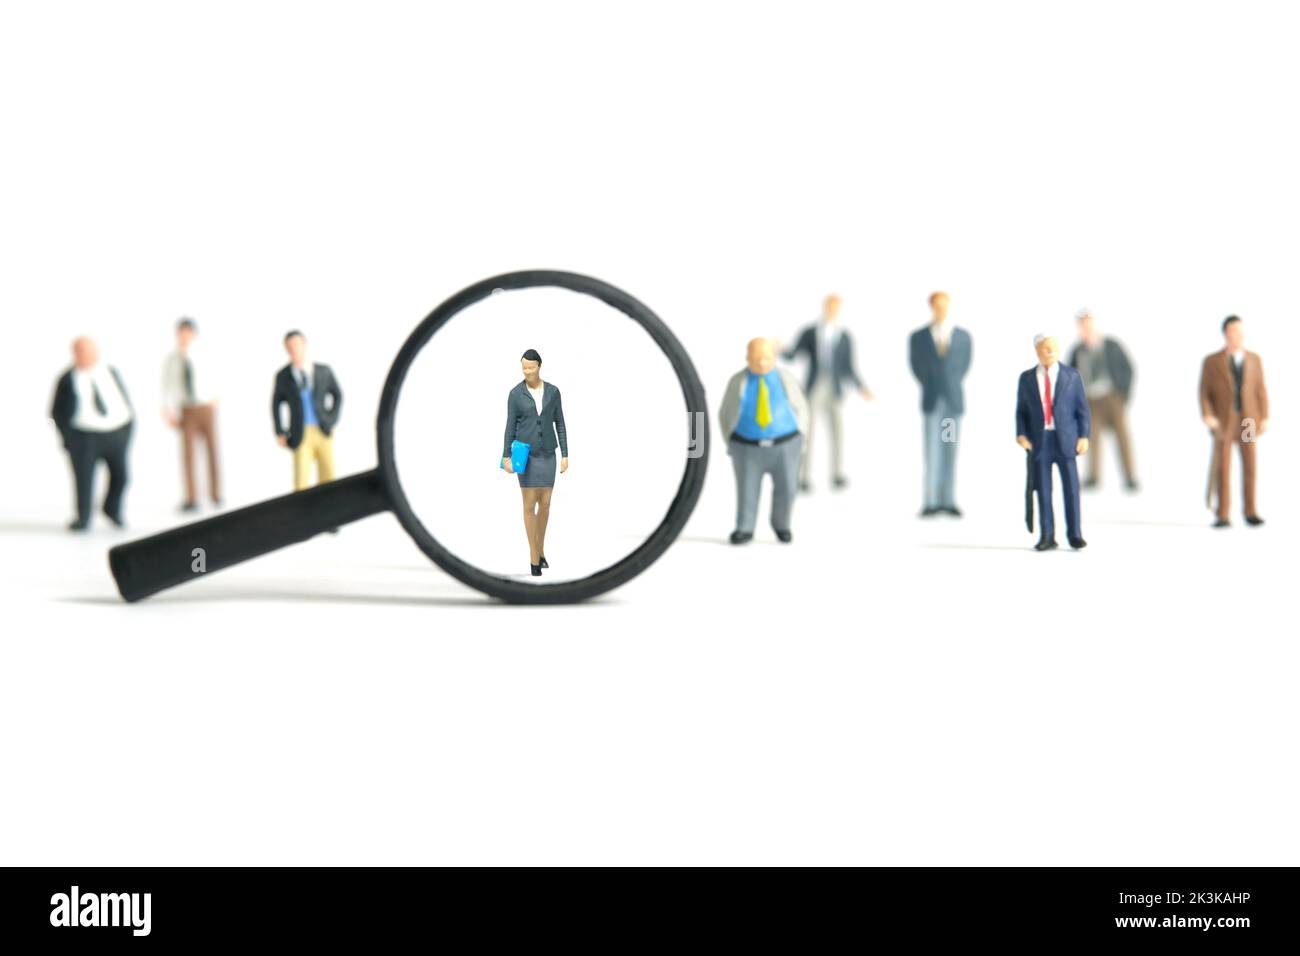 Miniature people toy figure photography. Women leader search. A businesswoman standing in the middle of male people crowd with magnifier glass. Isolat Stock Photo